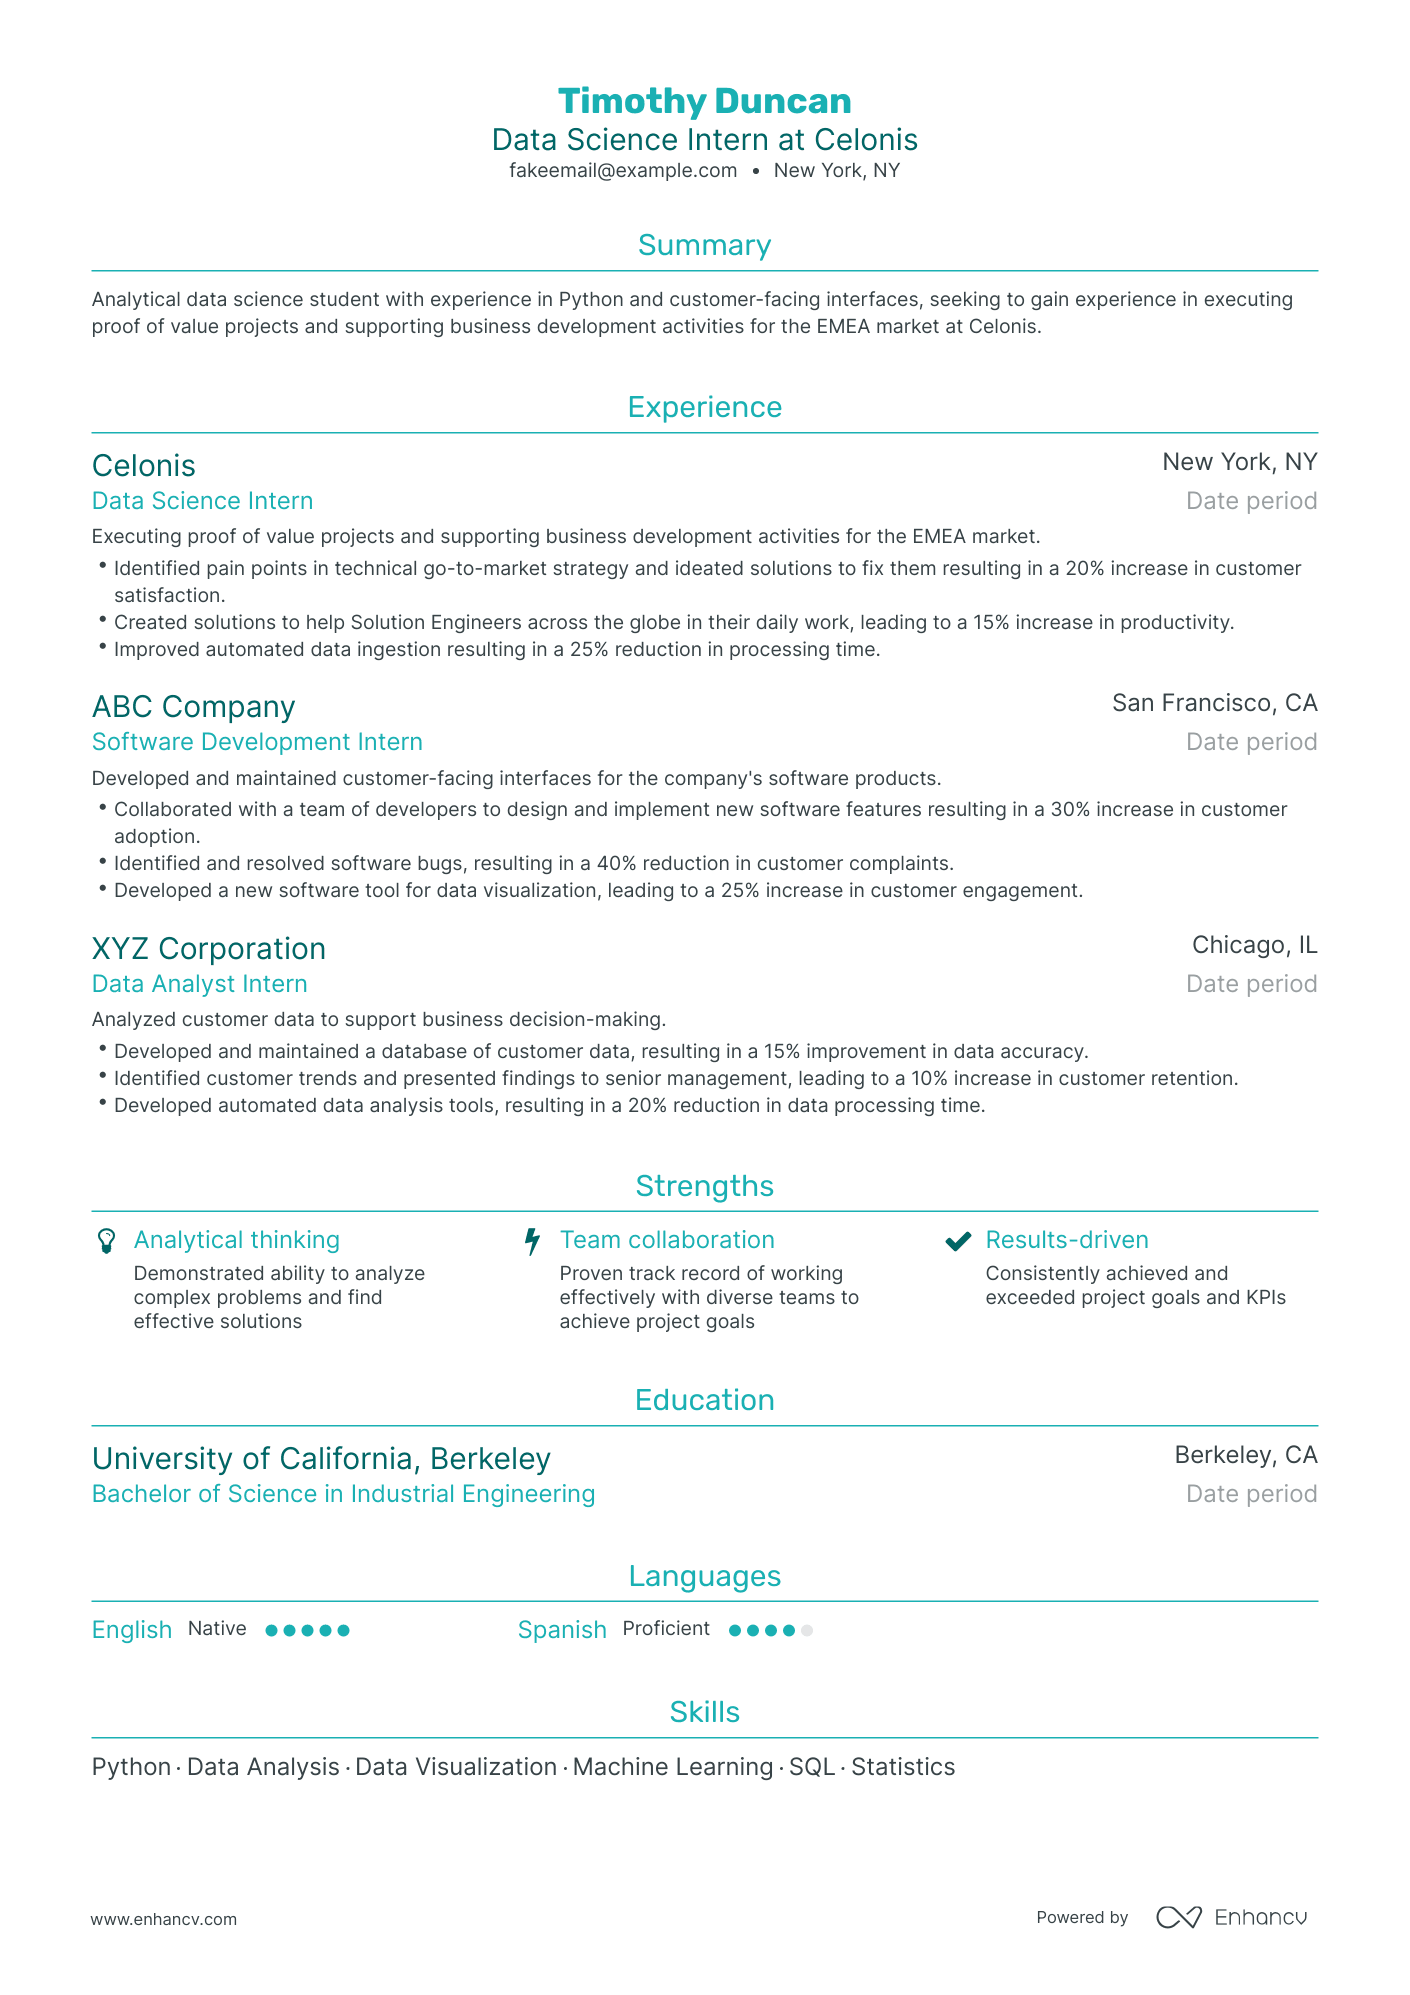 Traditional Data Science Intern Resume Template